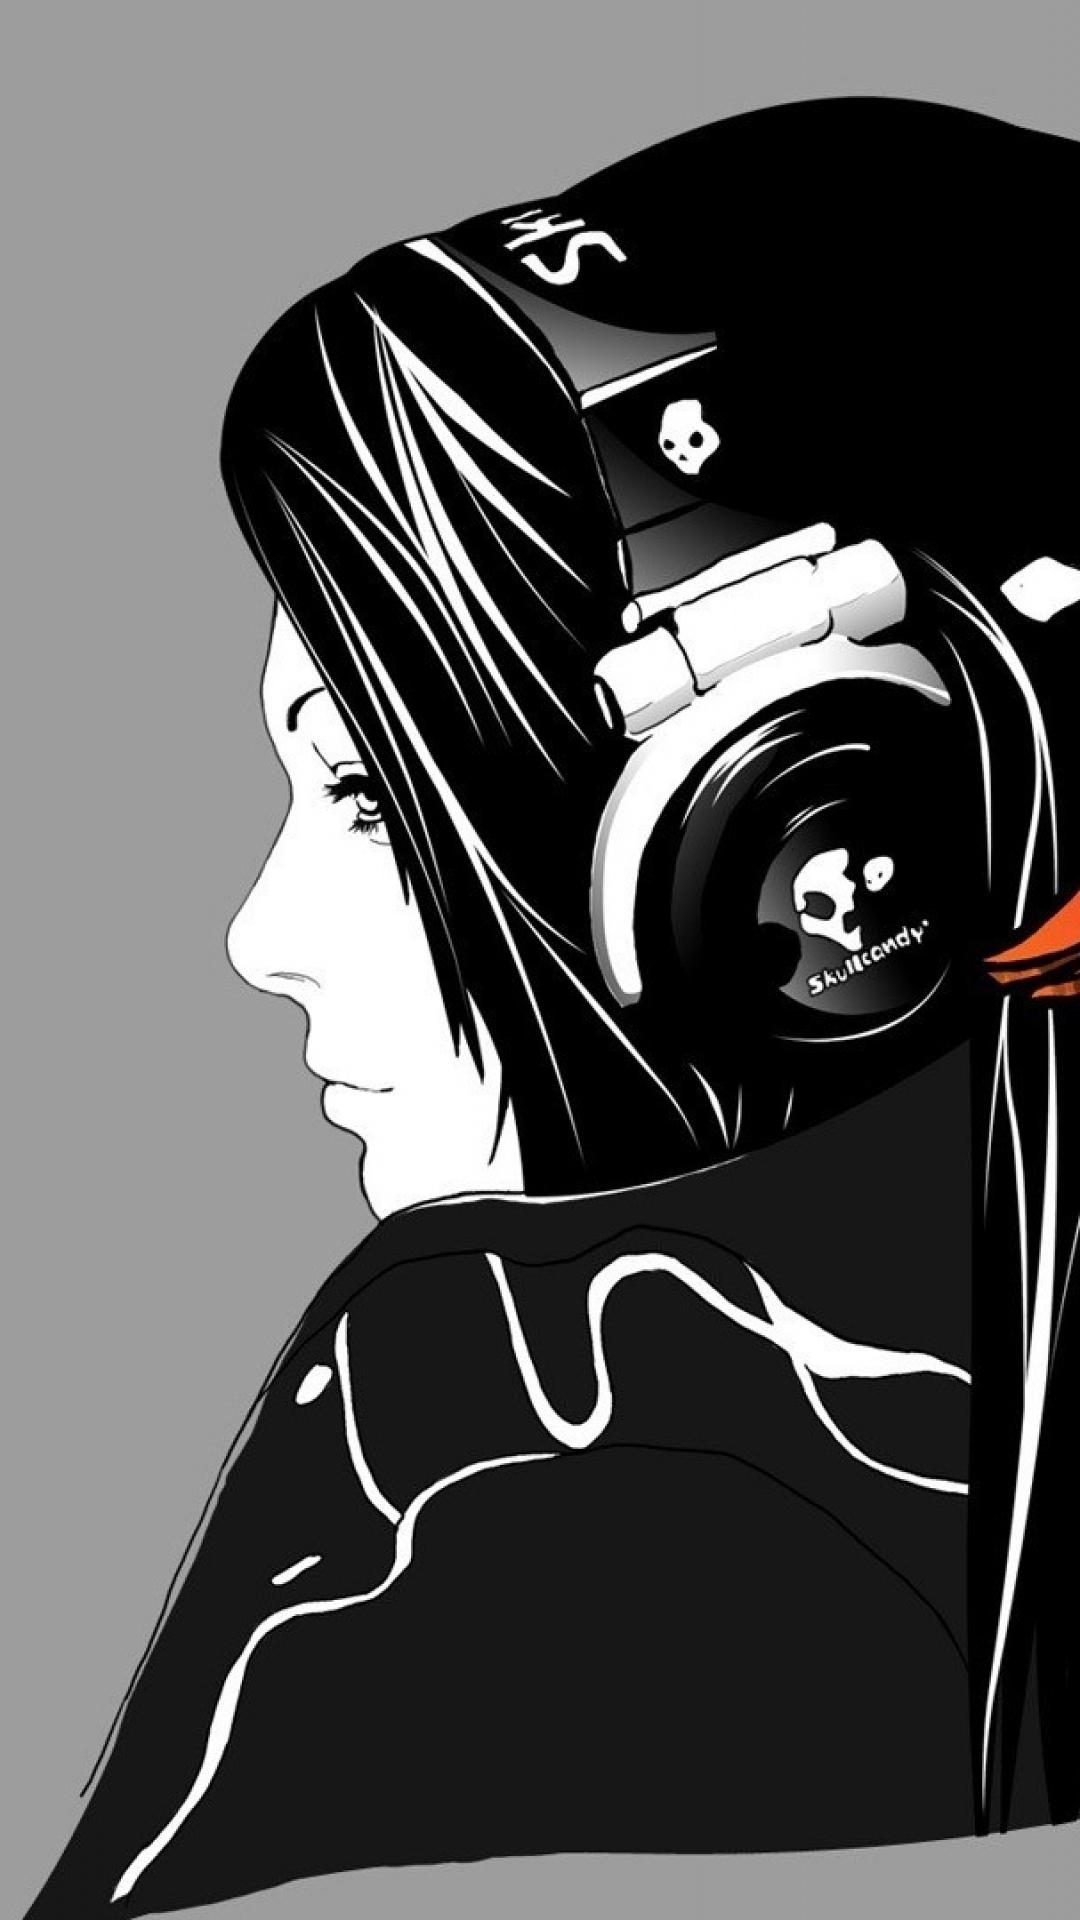 Free download Minimal Girl Skull Headphones Music Android Wallpaper download [1080x1920] for your Desktop, Mobile & Tablet. Explore Android Girl Wallpaper. Android Wallpaper HD, Free Wallpaper for Android, Wallpaper